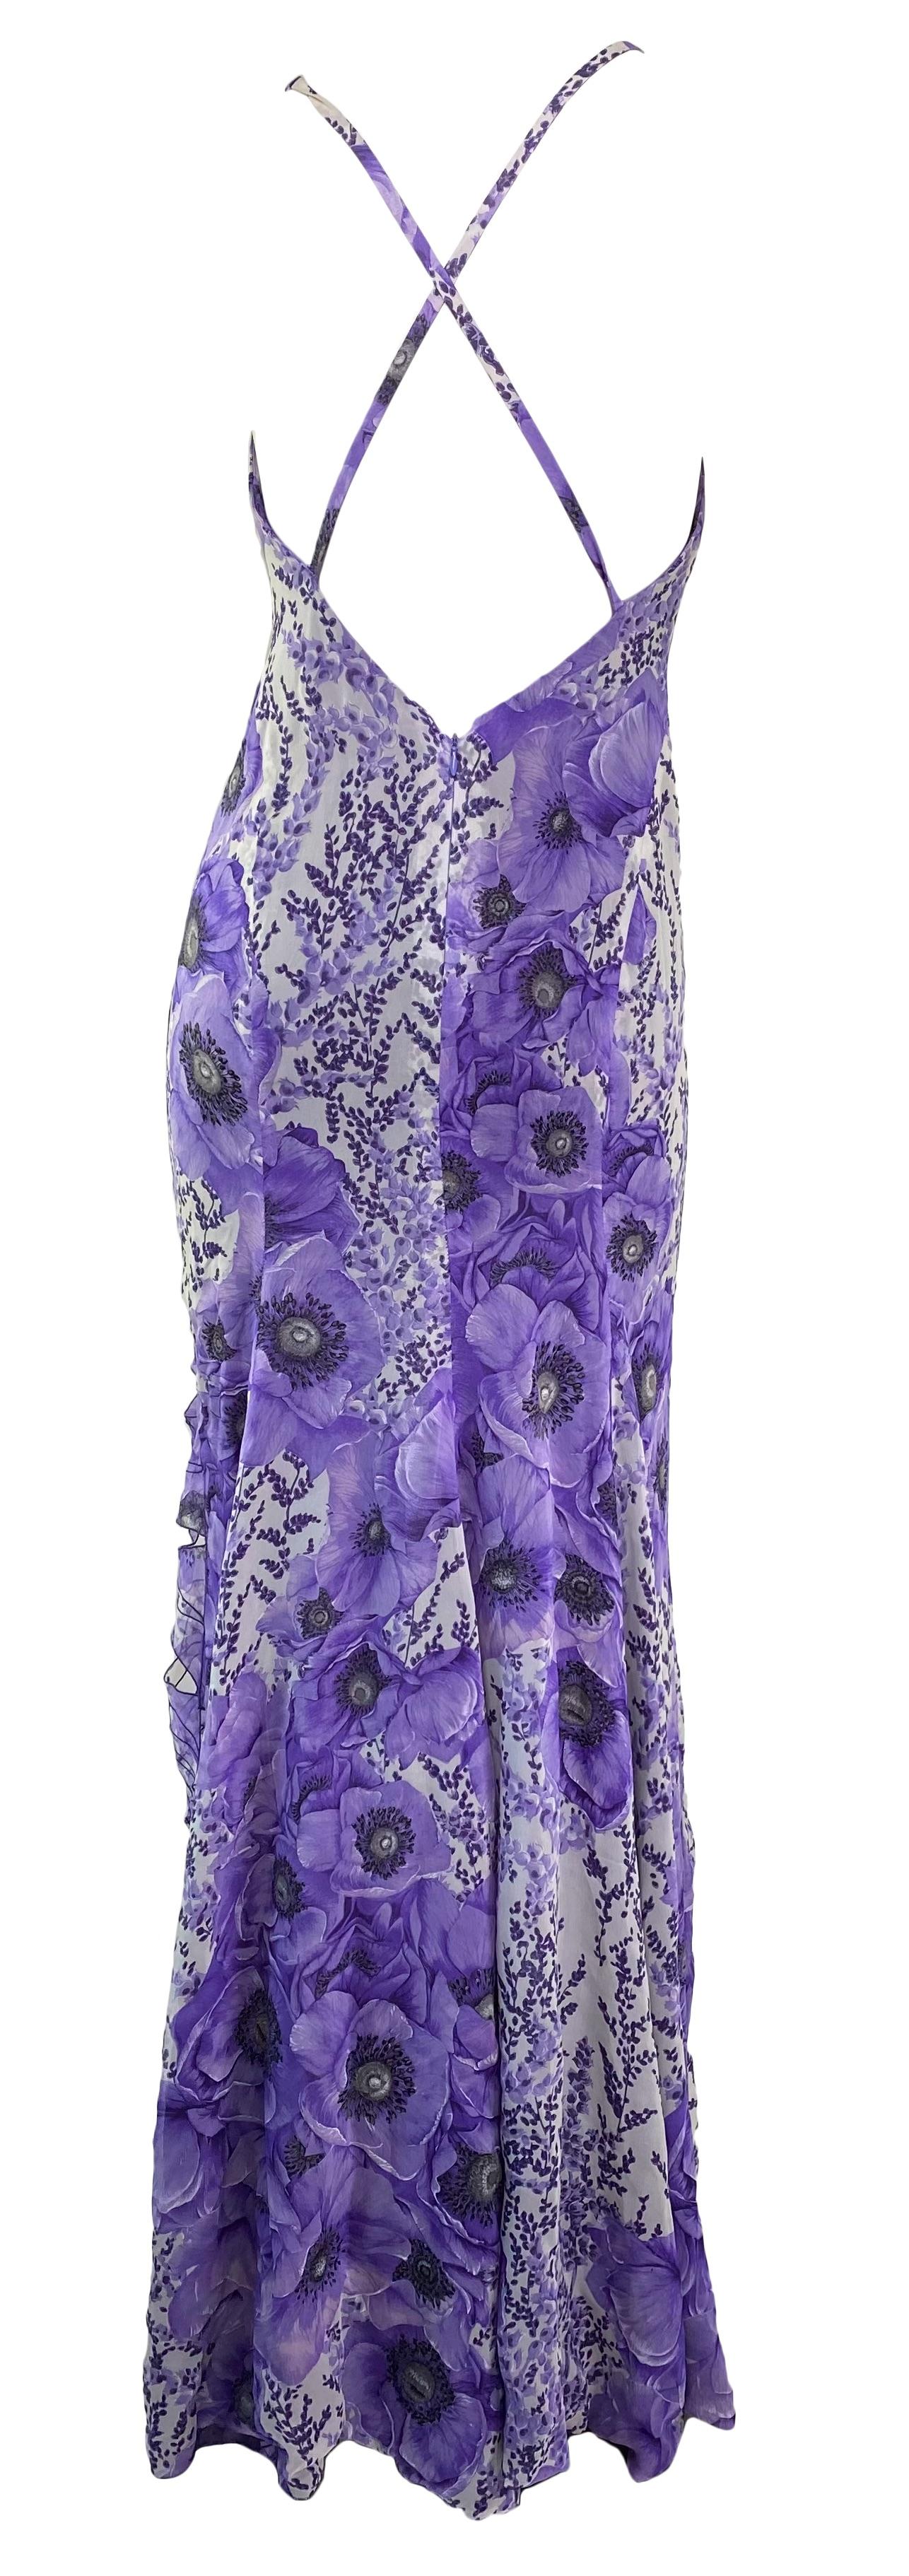 Gray F/W 2001 Gianni Versace by Donatella Serena Williams Cut-Out Purple Poppy Gown For Sale